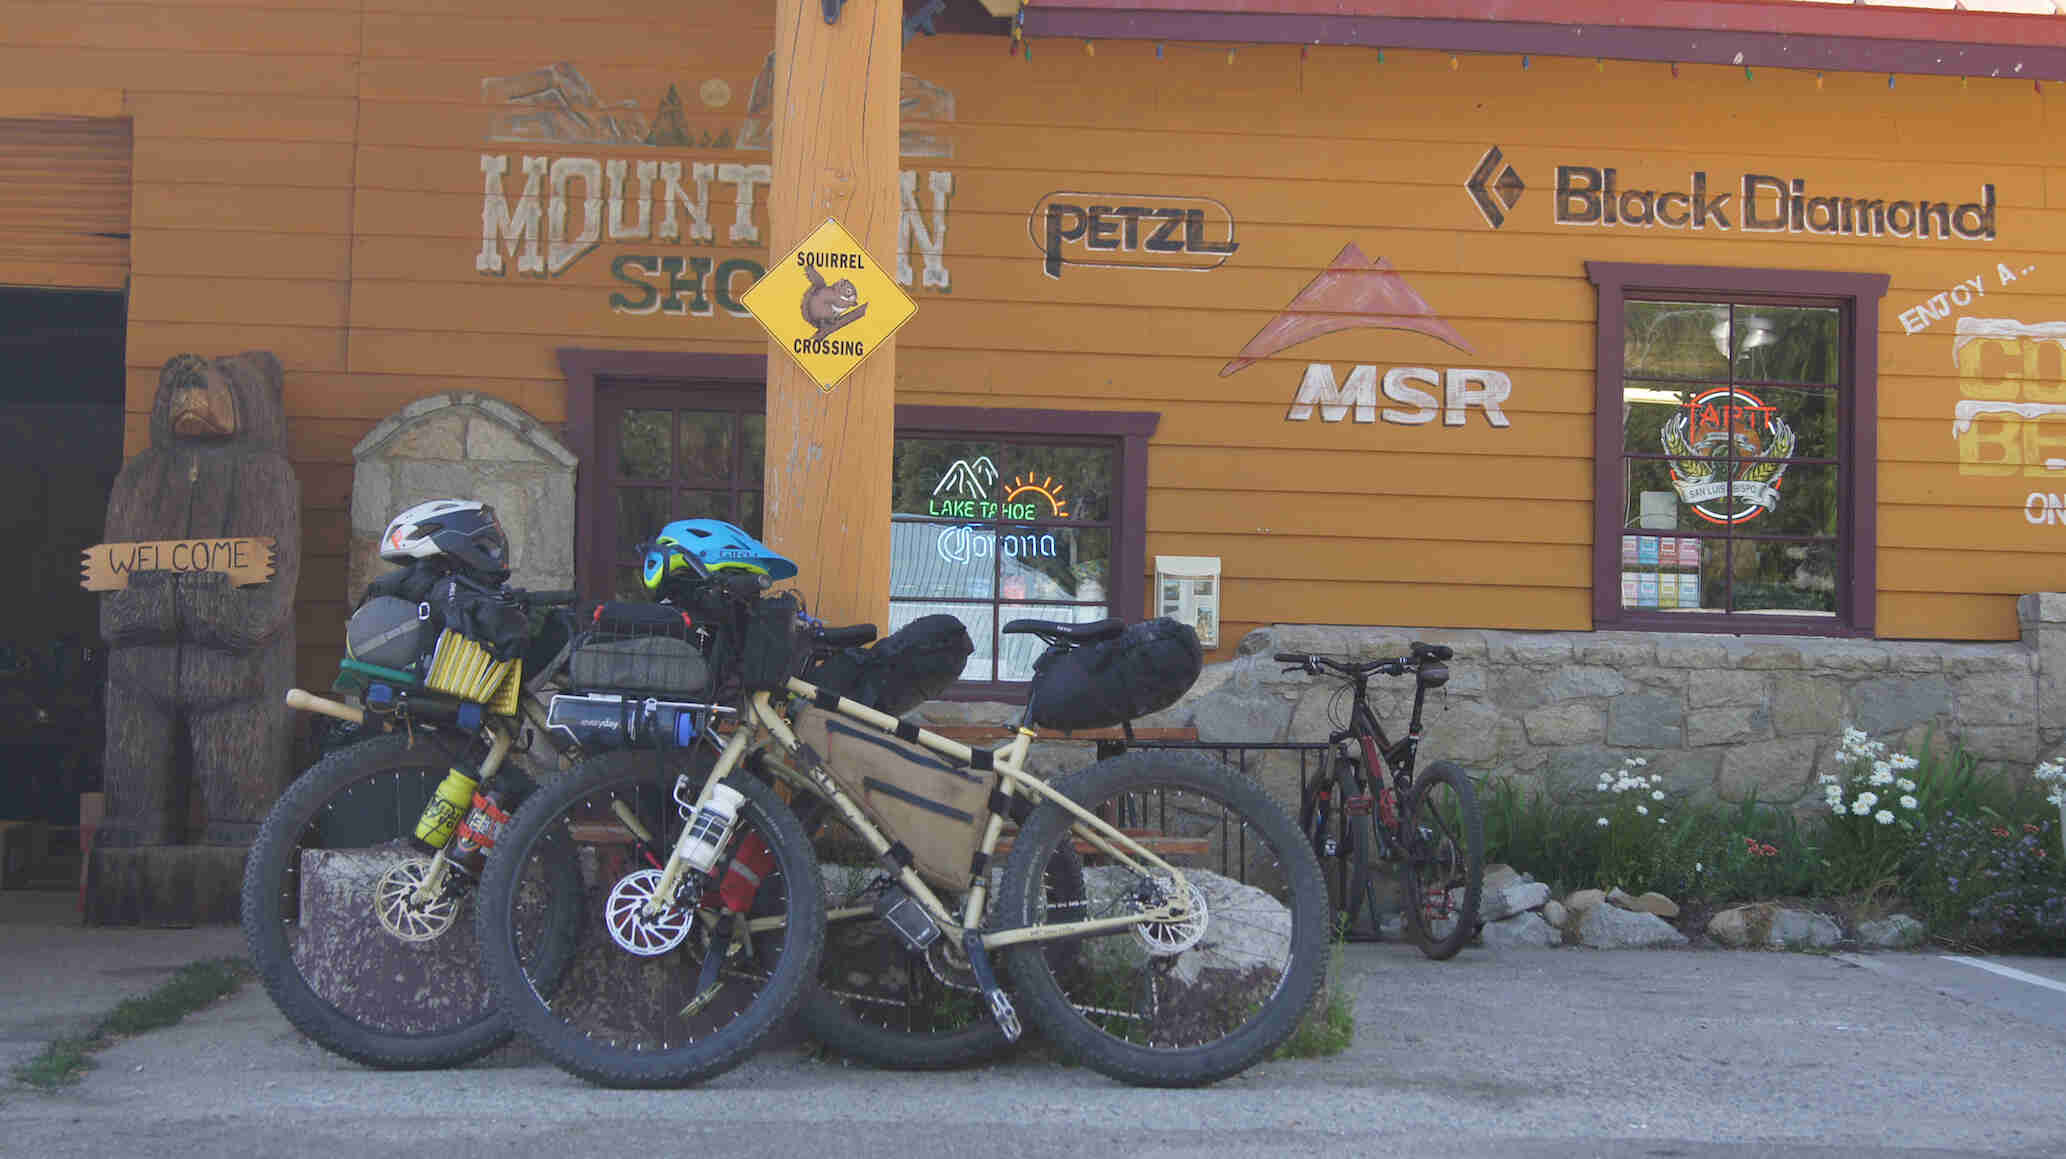 Left profile view of 2 Surly fat bikes, loaded with gear, side by side in front of an orange Mountain Shop building